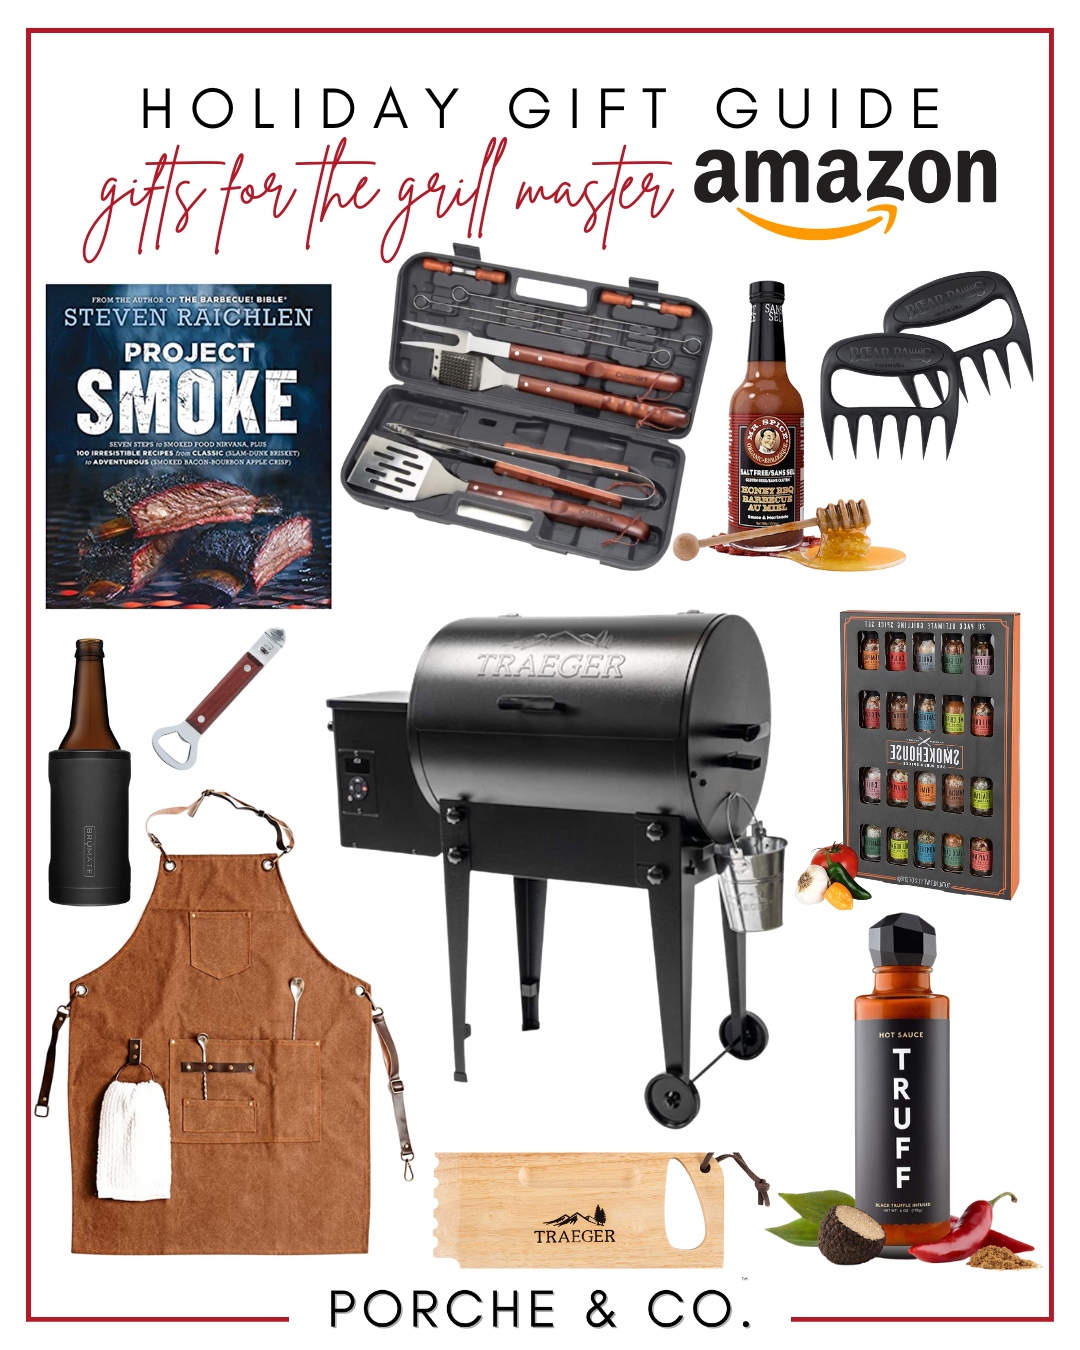 gifts for the grillmaster from amazon